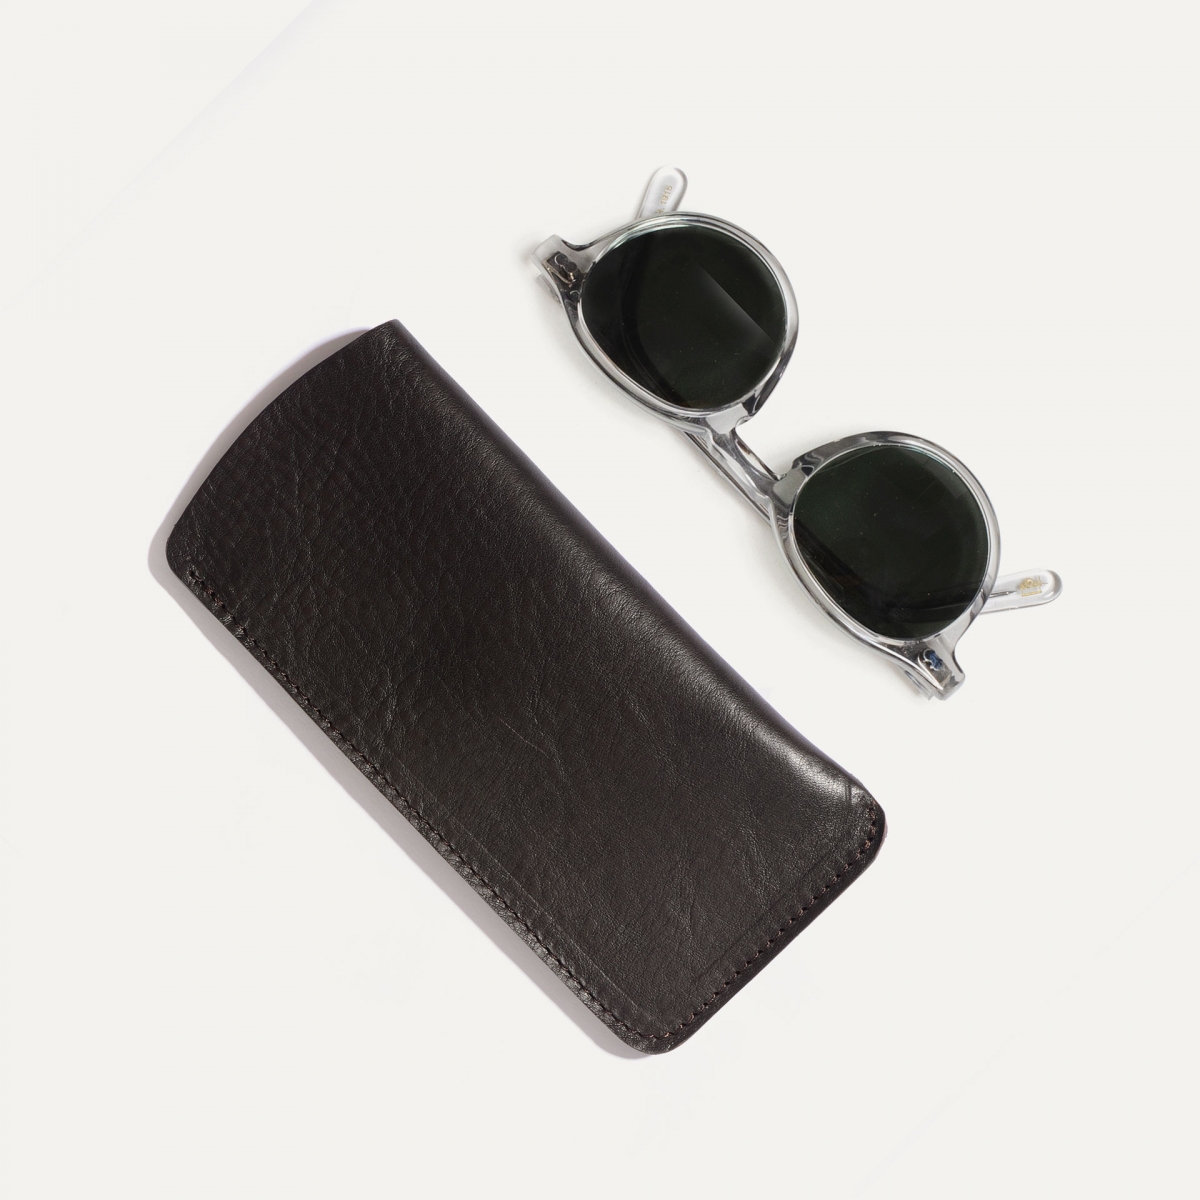 Deluxe Soft Leather Glasses Case for Men | Handmade Sunglasses Storage Case, Solid Brown